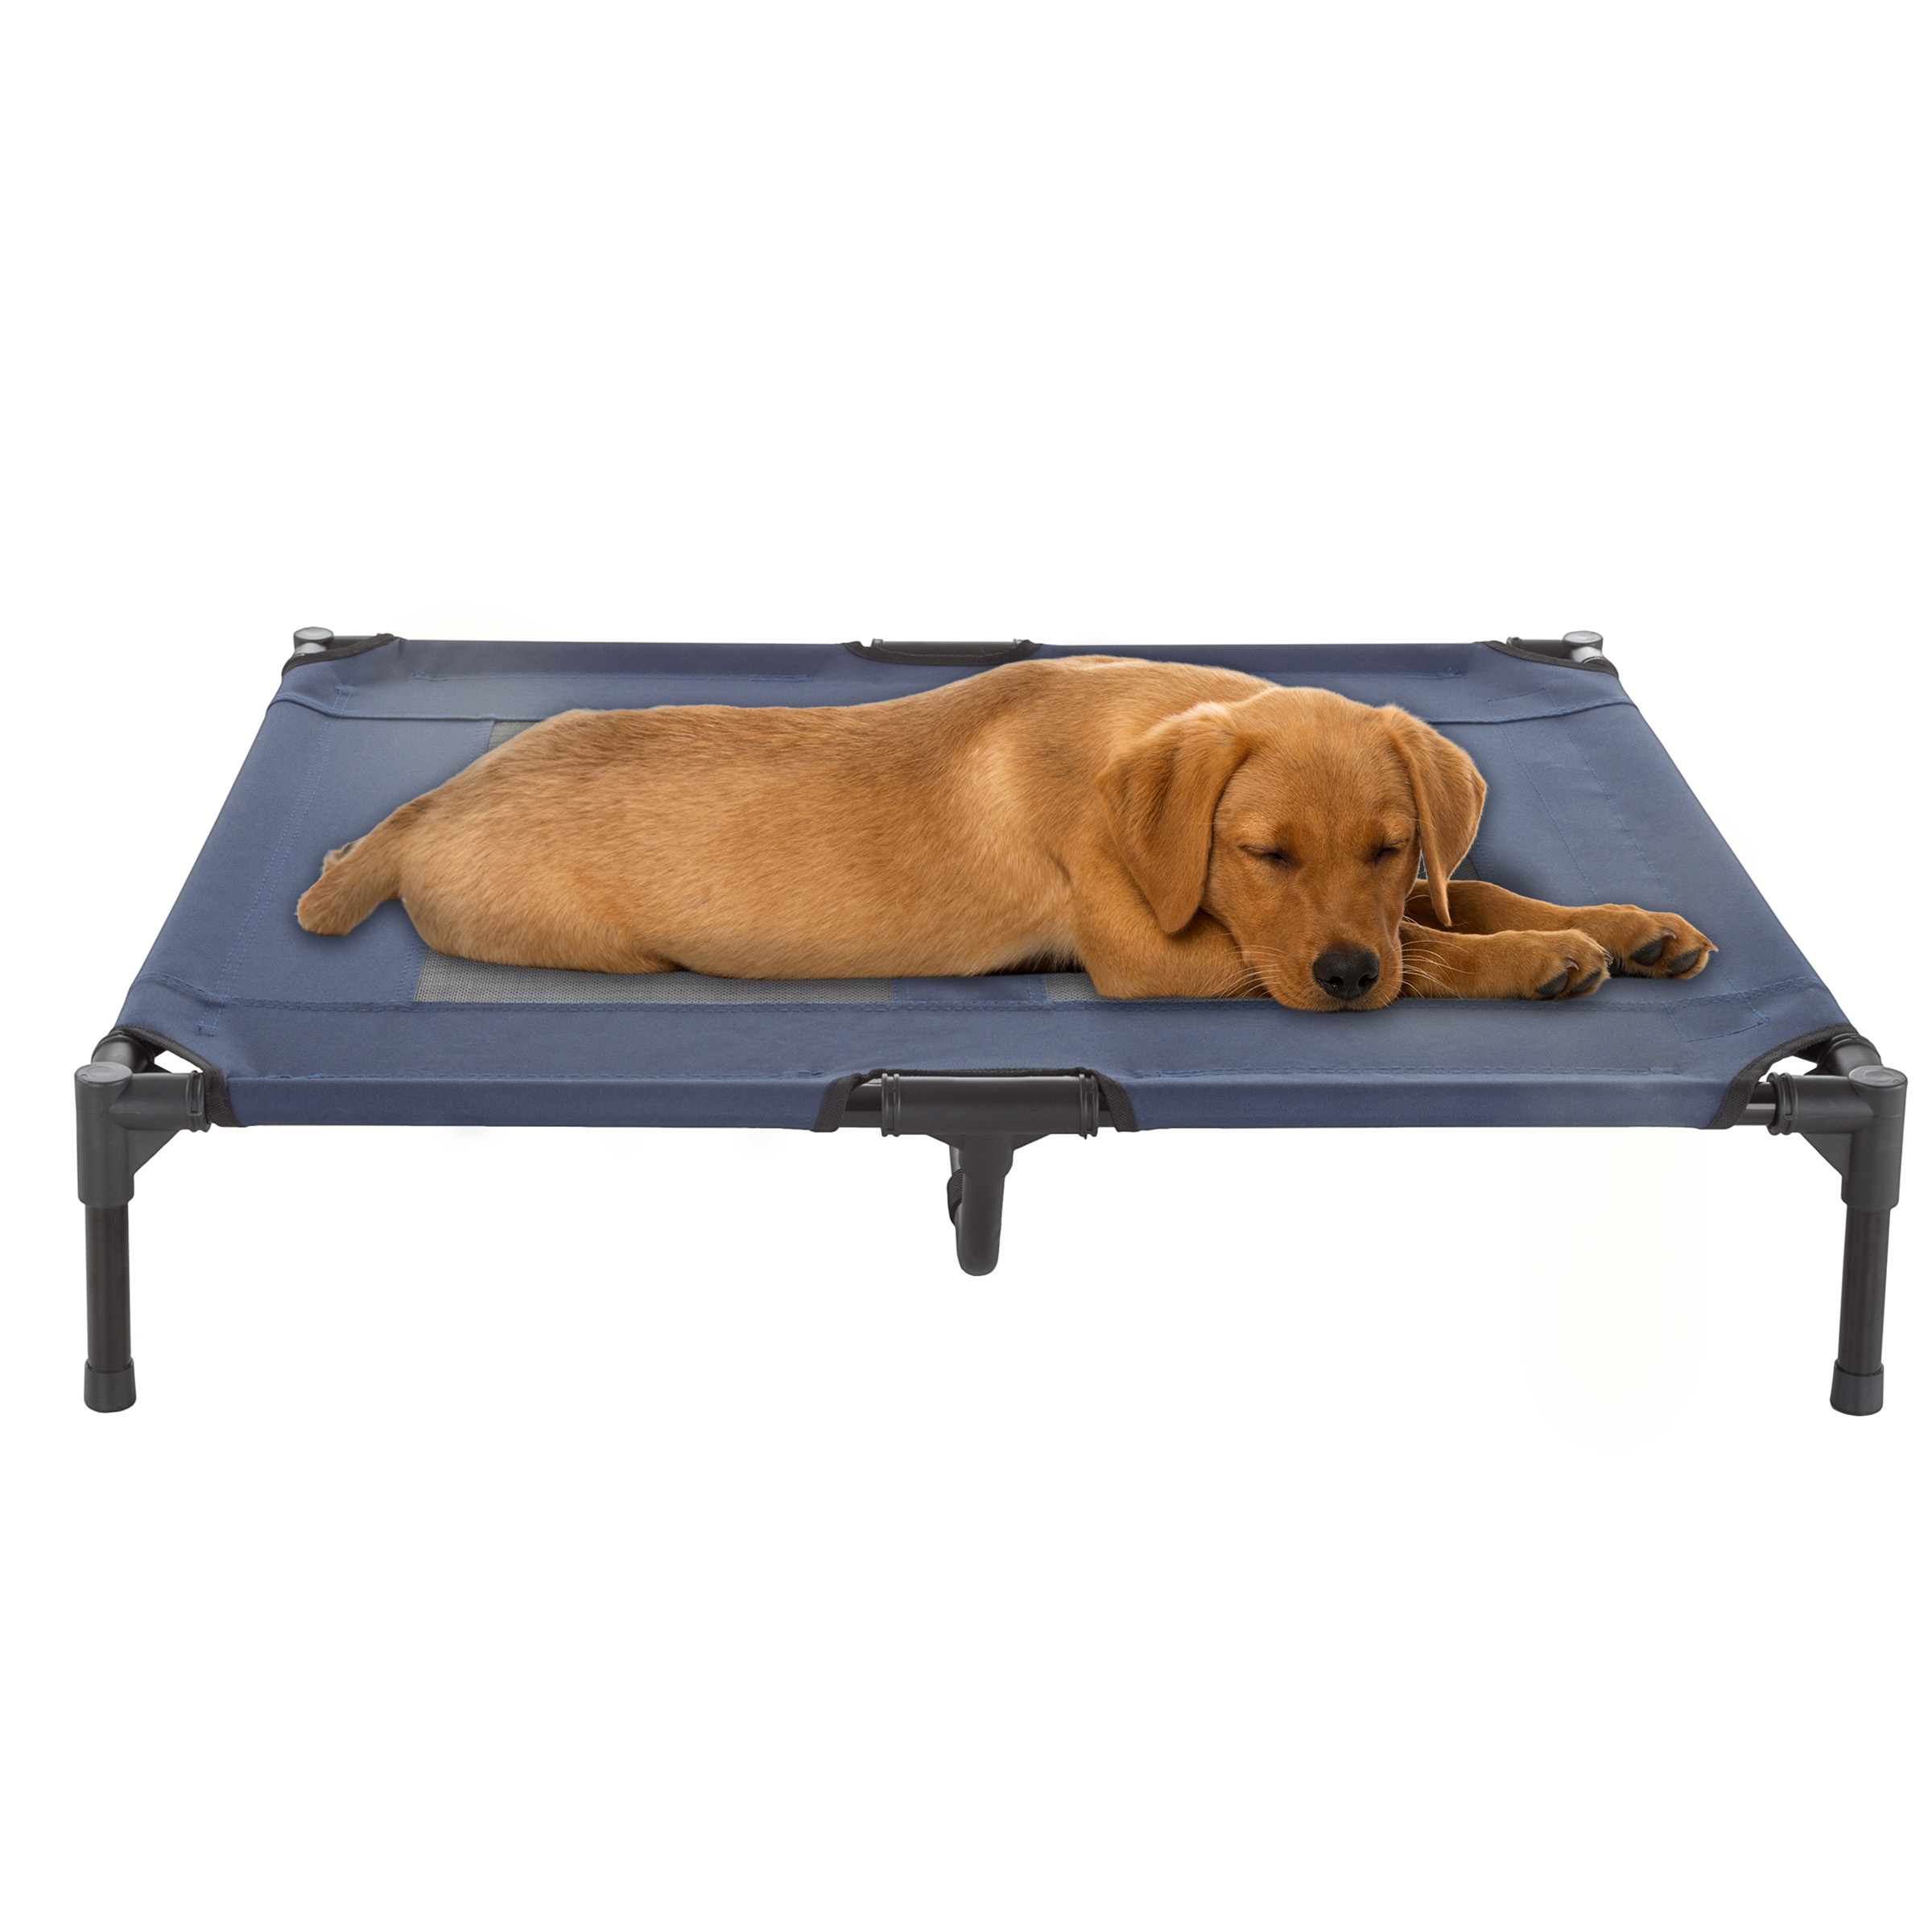 Med Large Dog Cat Bed Indoor Outdoor Raised Elevated Cot 36 X 29 Inch Camping Travel